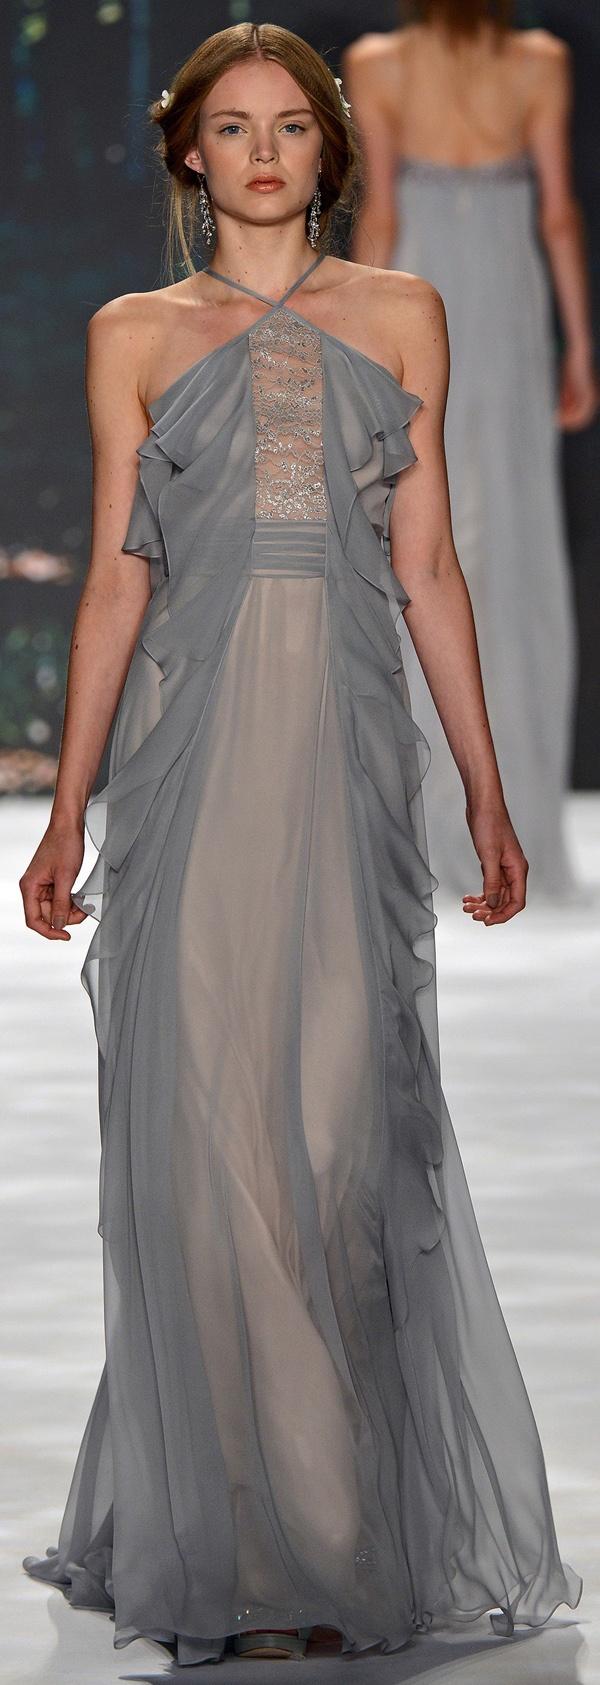 Mariage - Badgley Mischka Spring 2013 Ready-to-Wear Fashion Show: Complete Collection